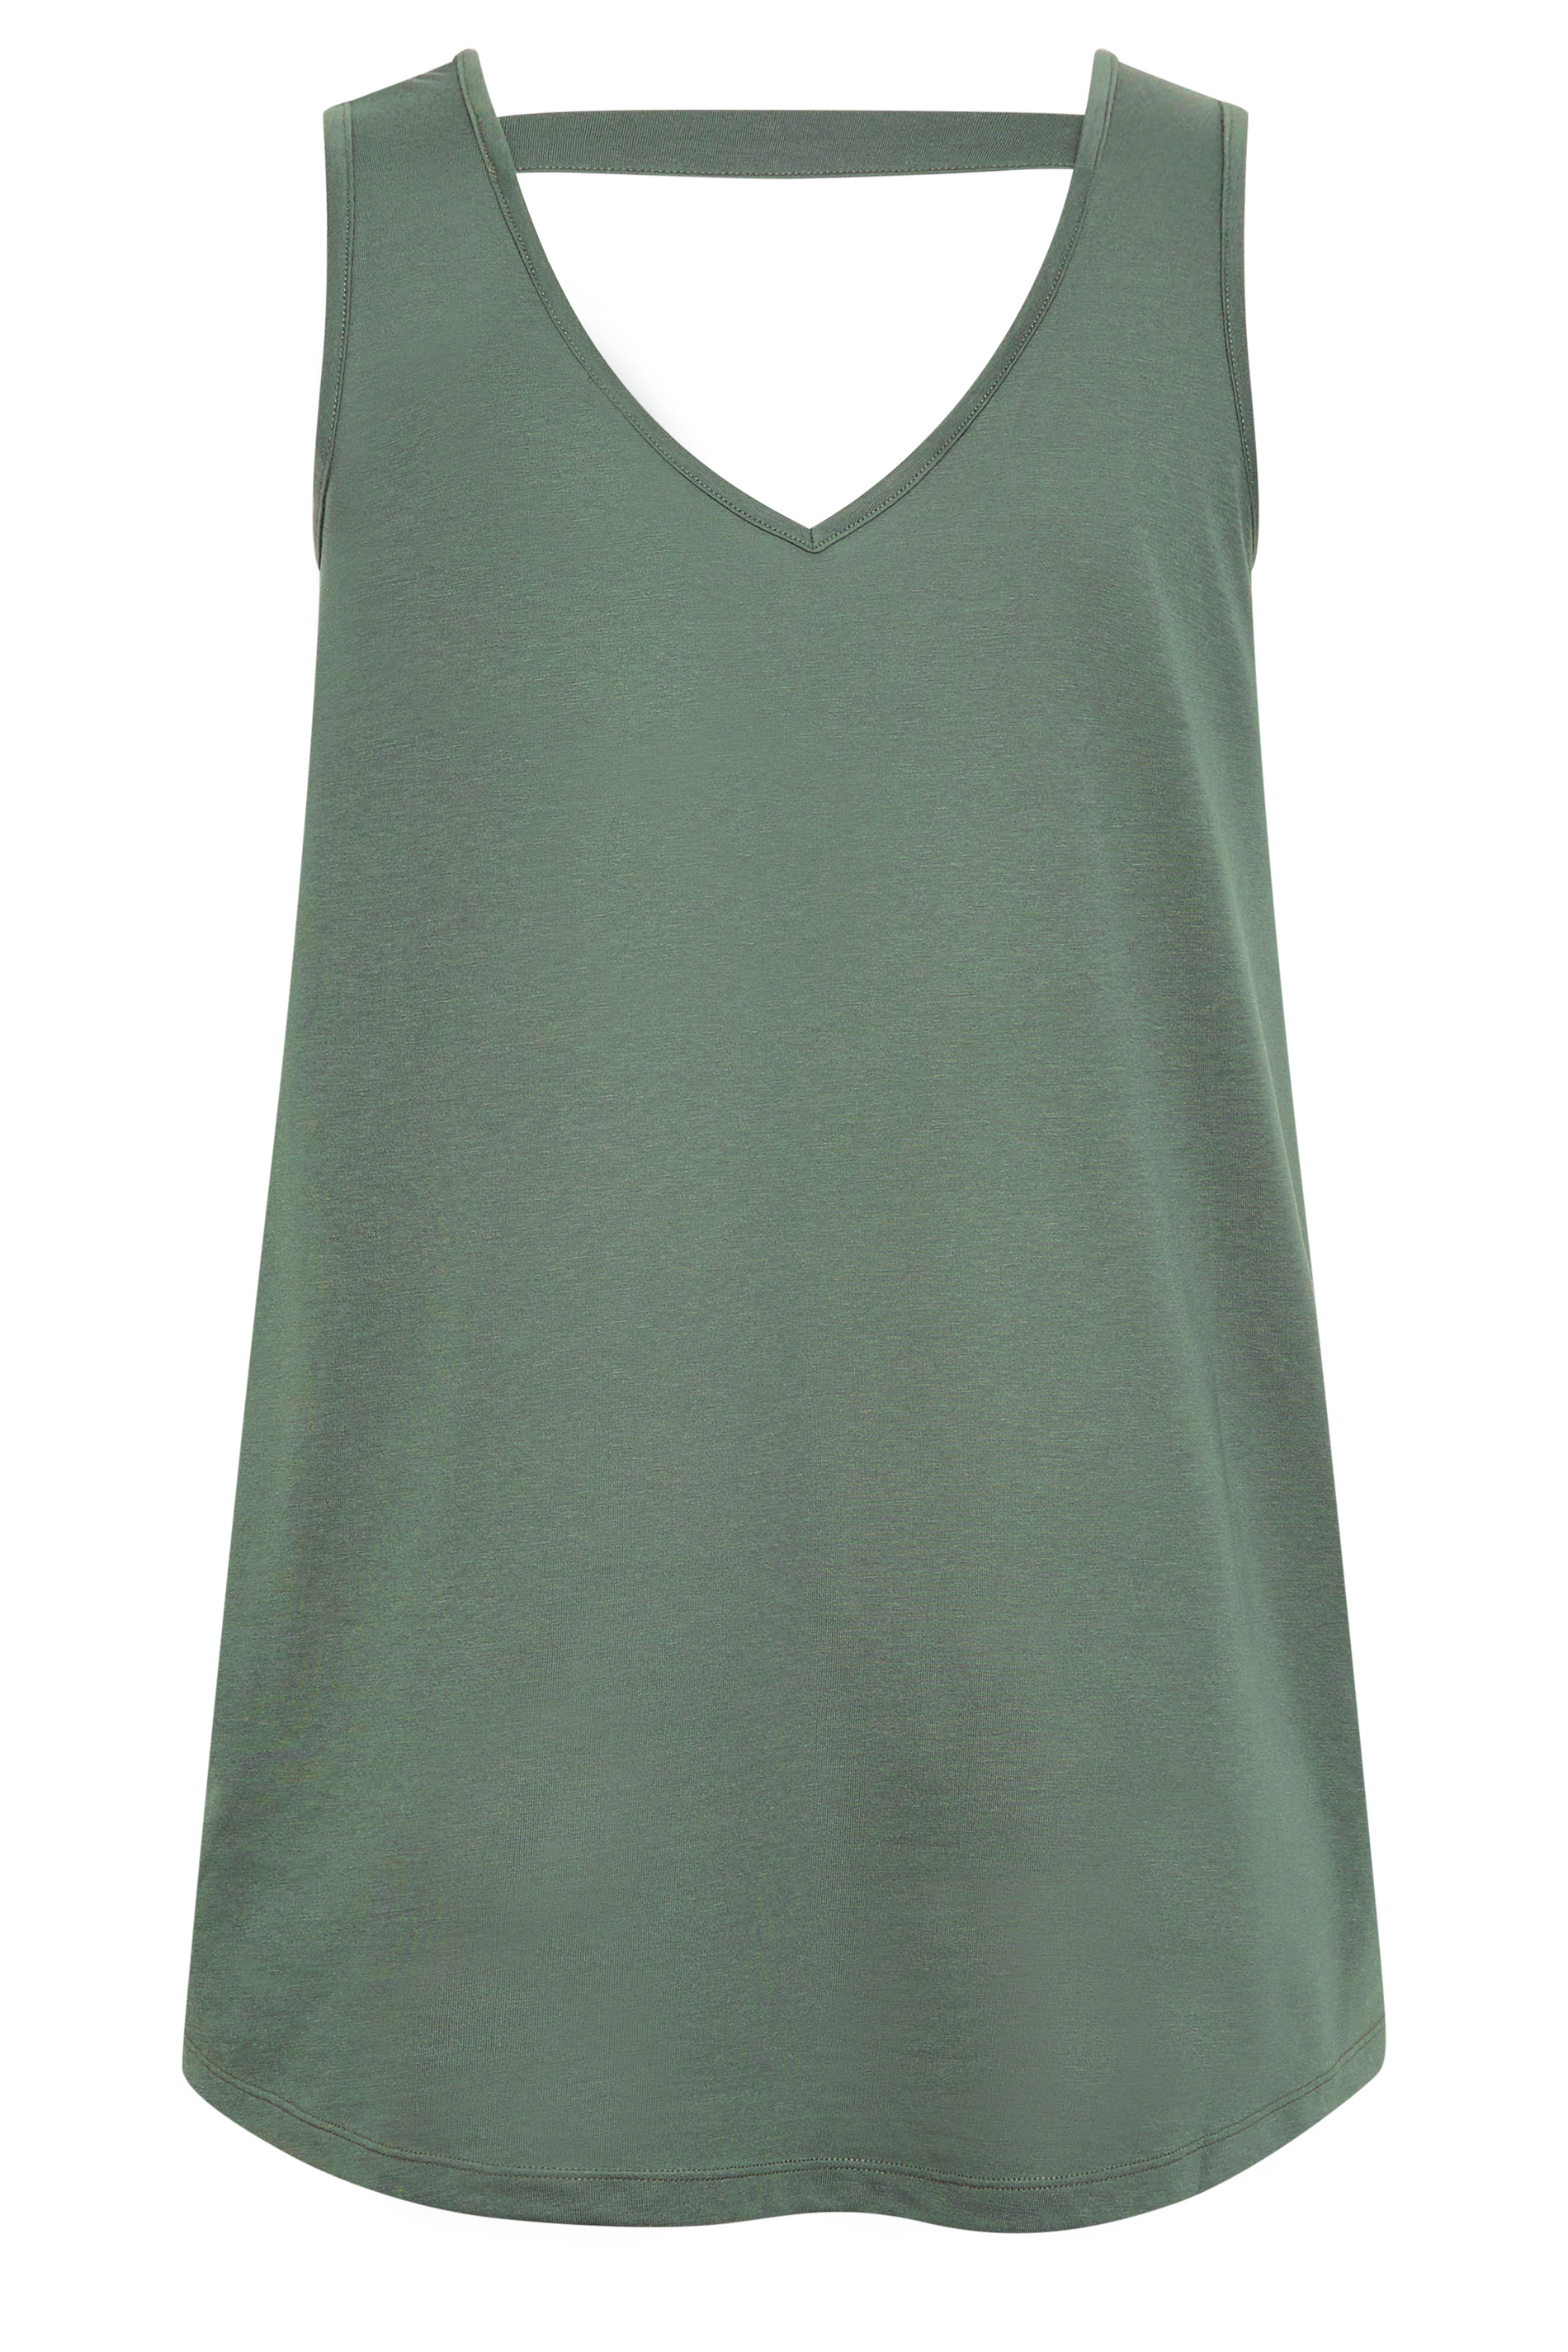 YOURS Plus Size Curve Khaki Green Bar Back Vest Top | Yours Clothing